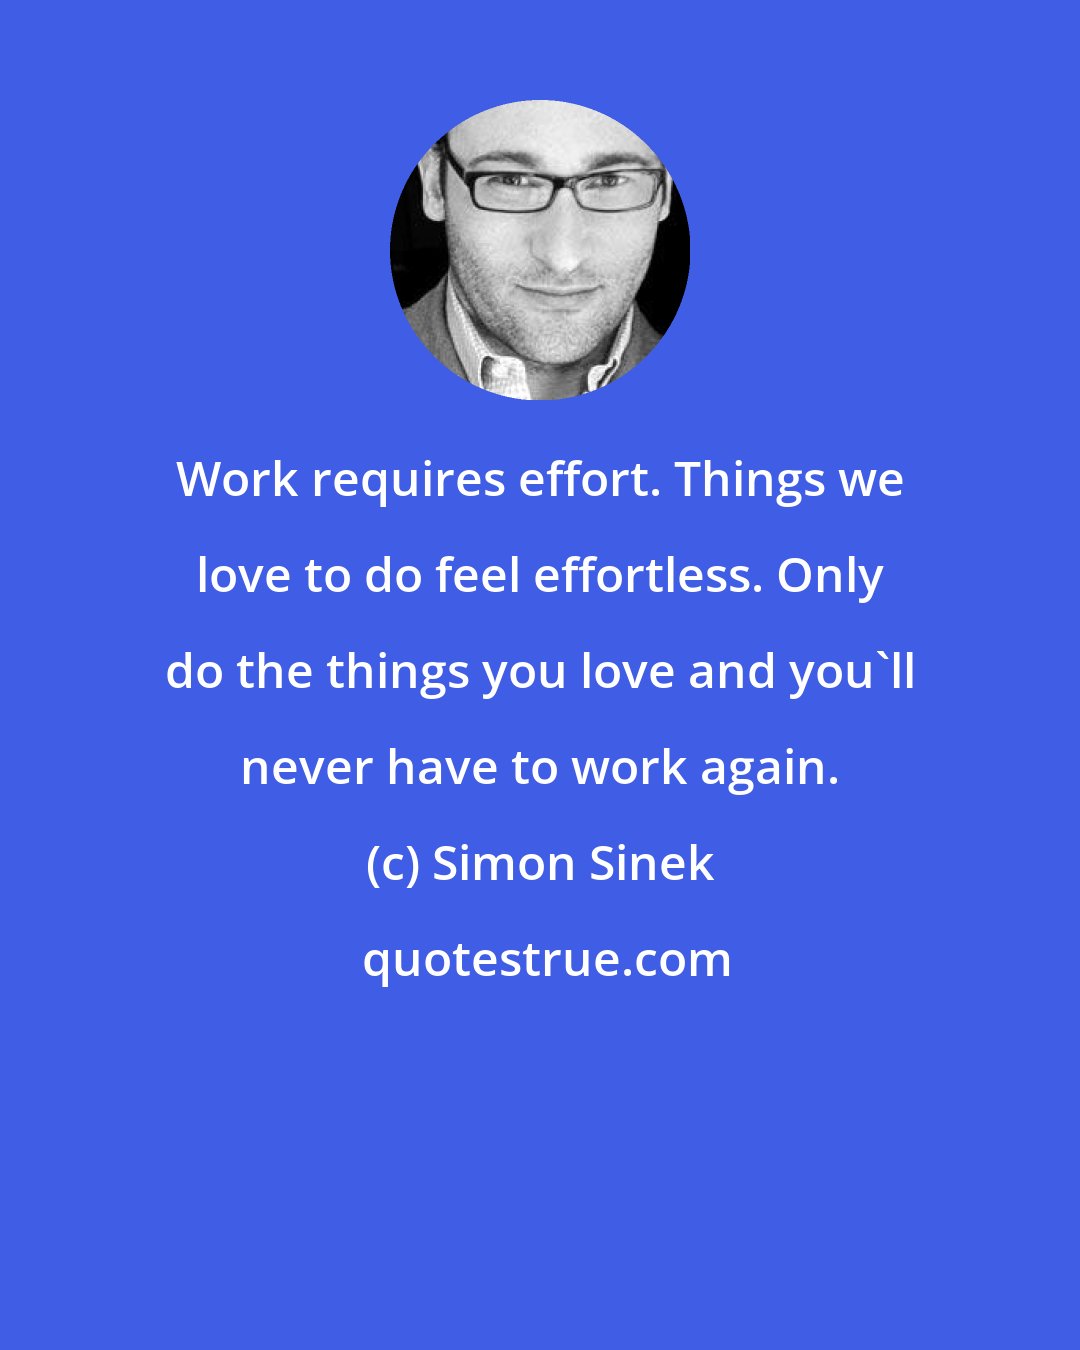 Simon Sinek: Work requires effort. Things we love to do feel effortless. Only do the things you love and you'll never have to work again.